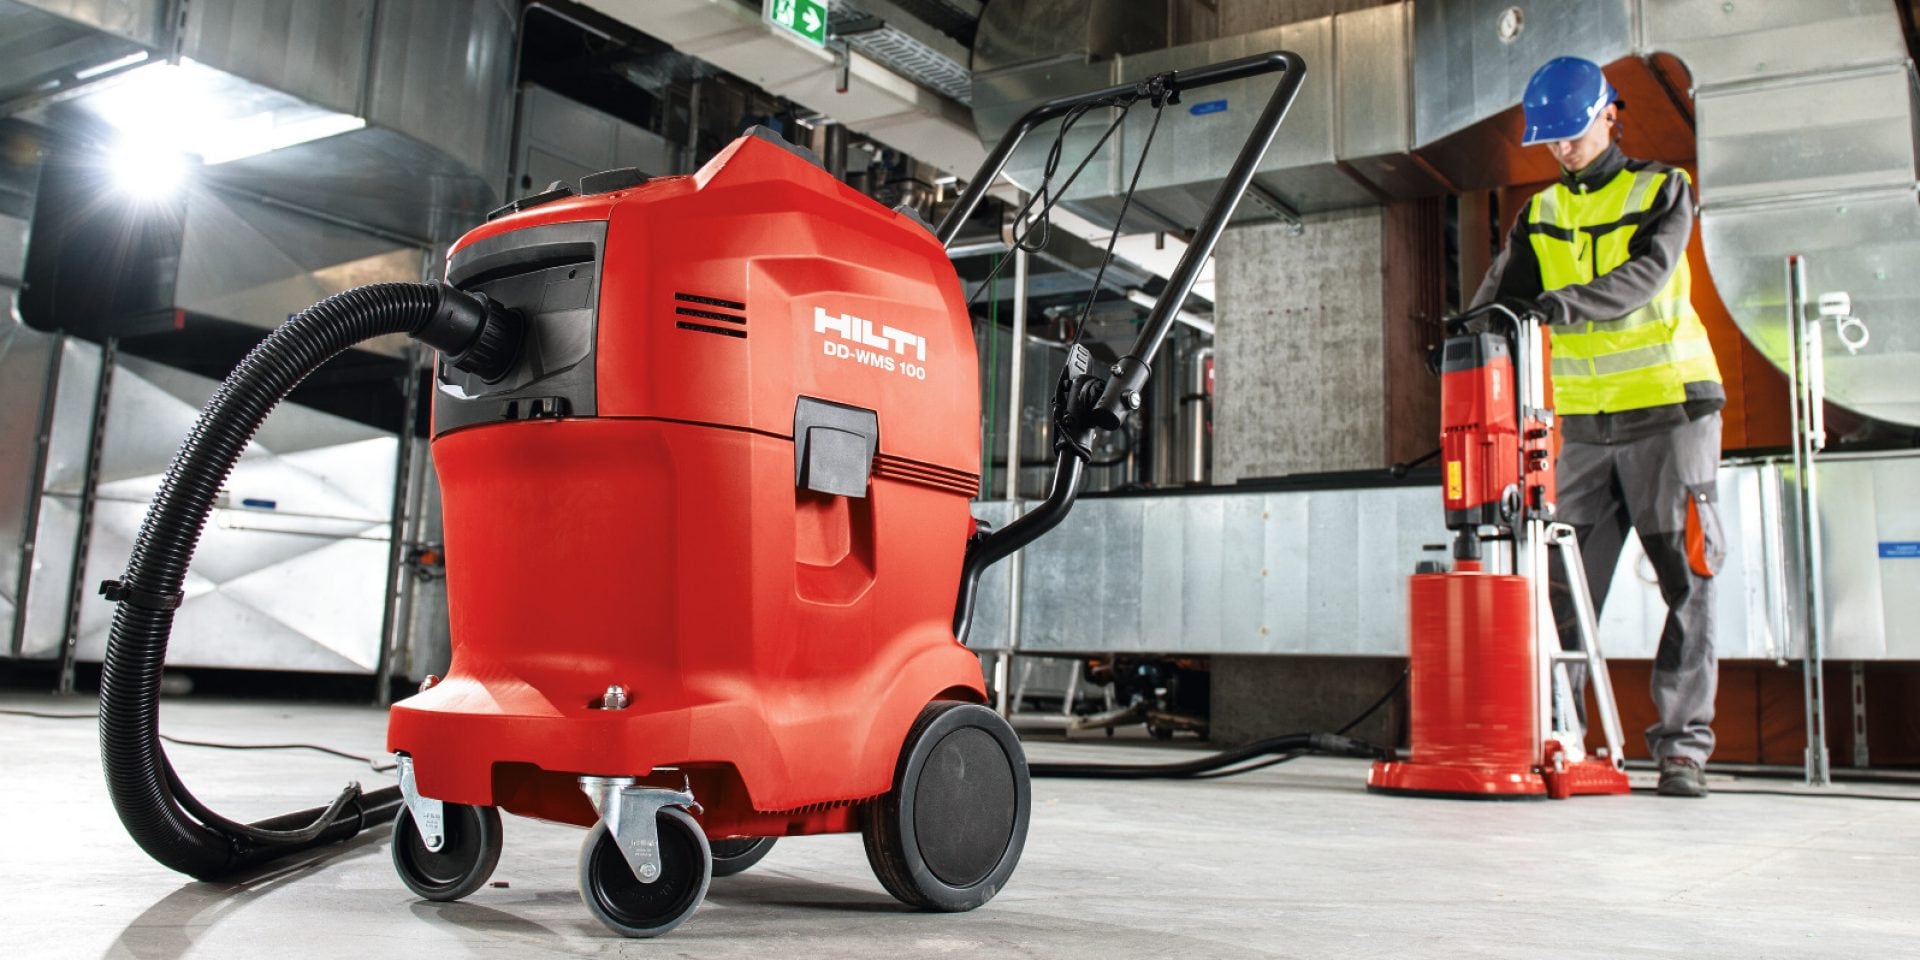 The new way of diamond drilling with Hilti DD-WMW 100 water management system